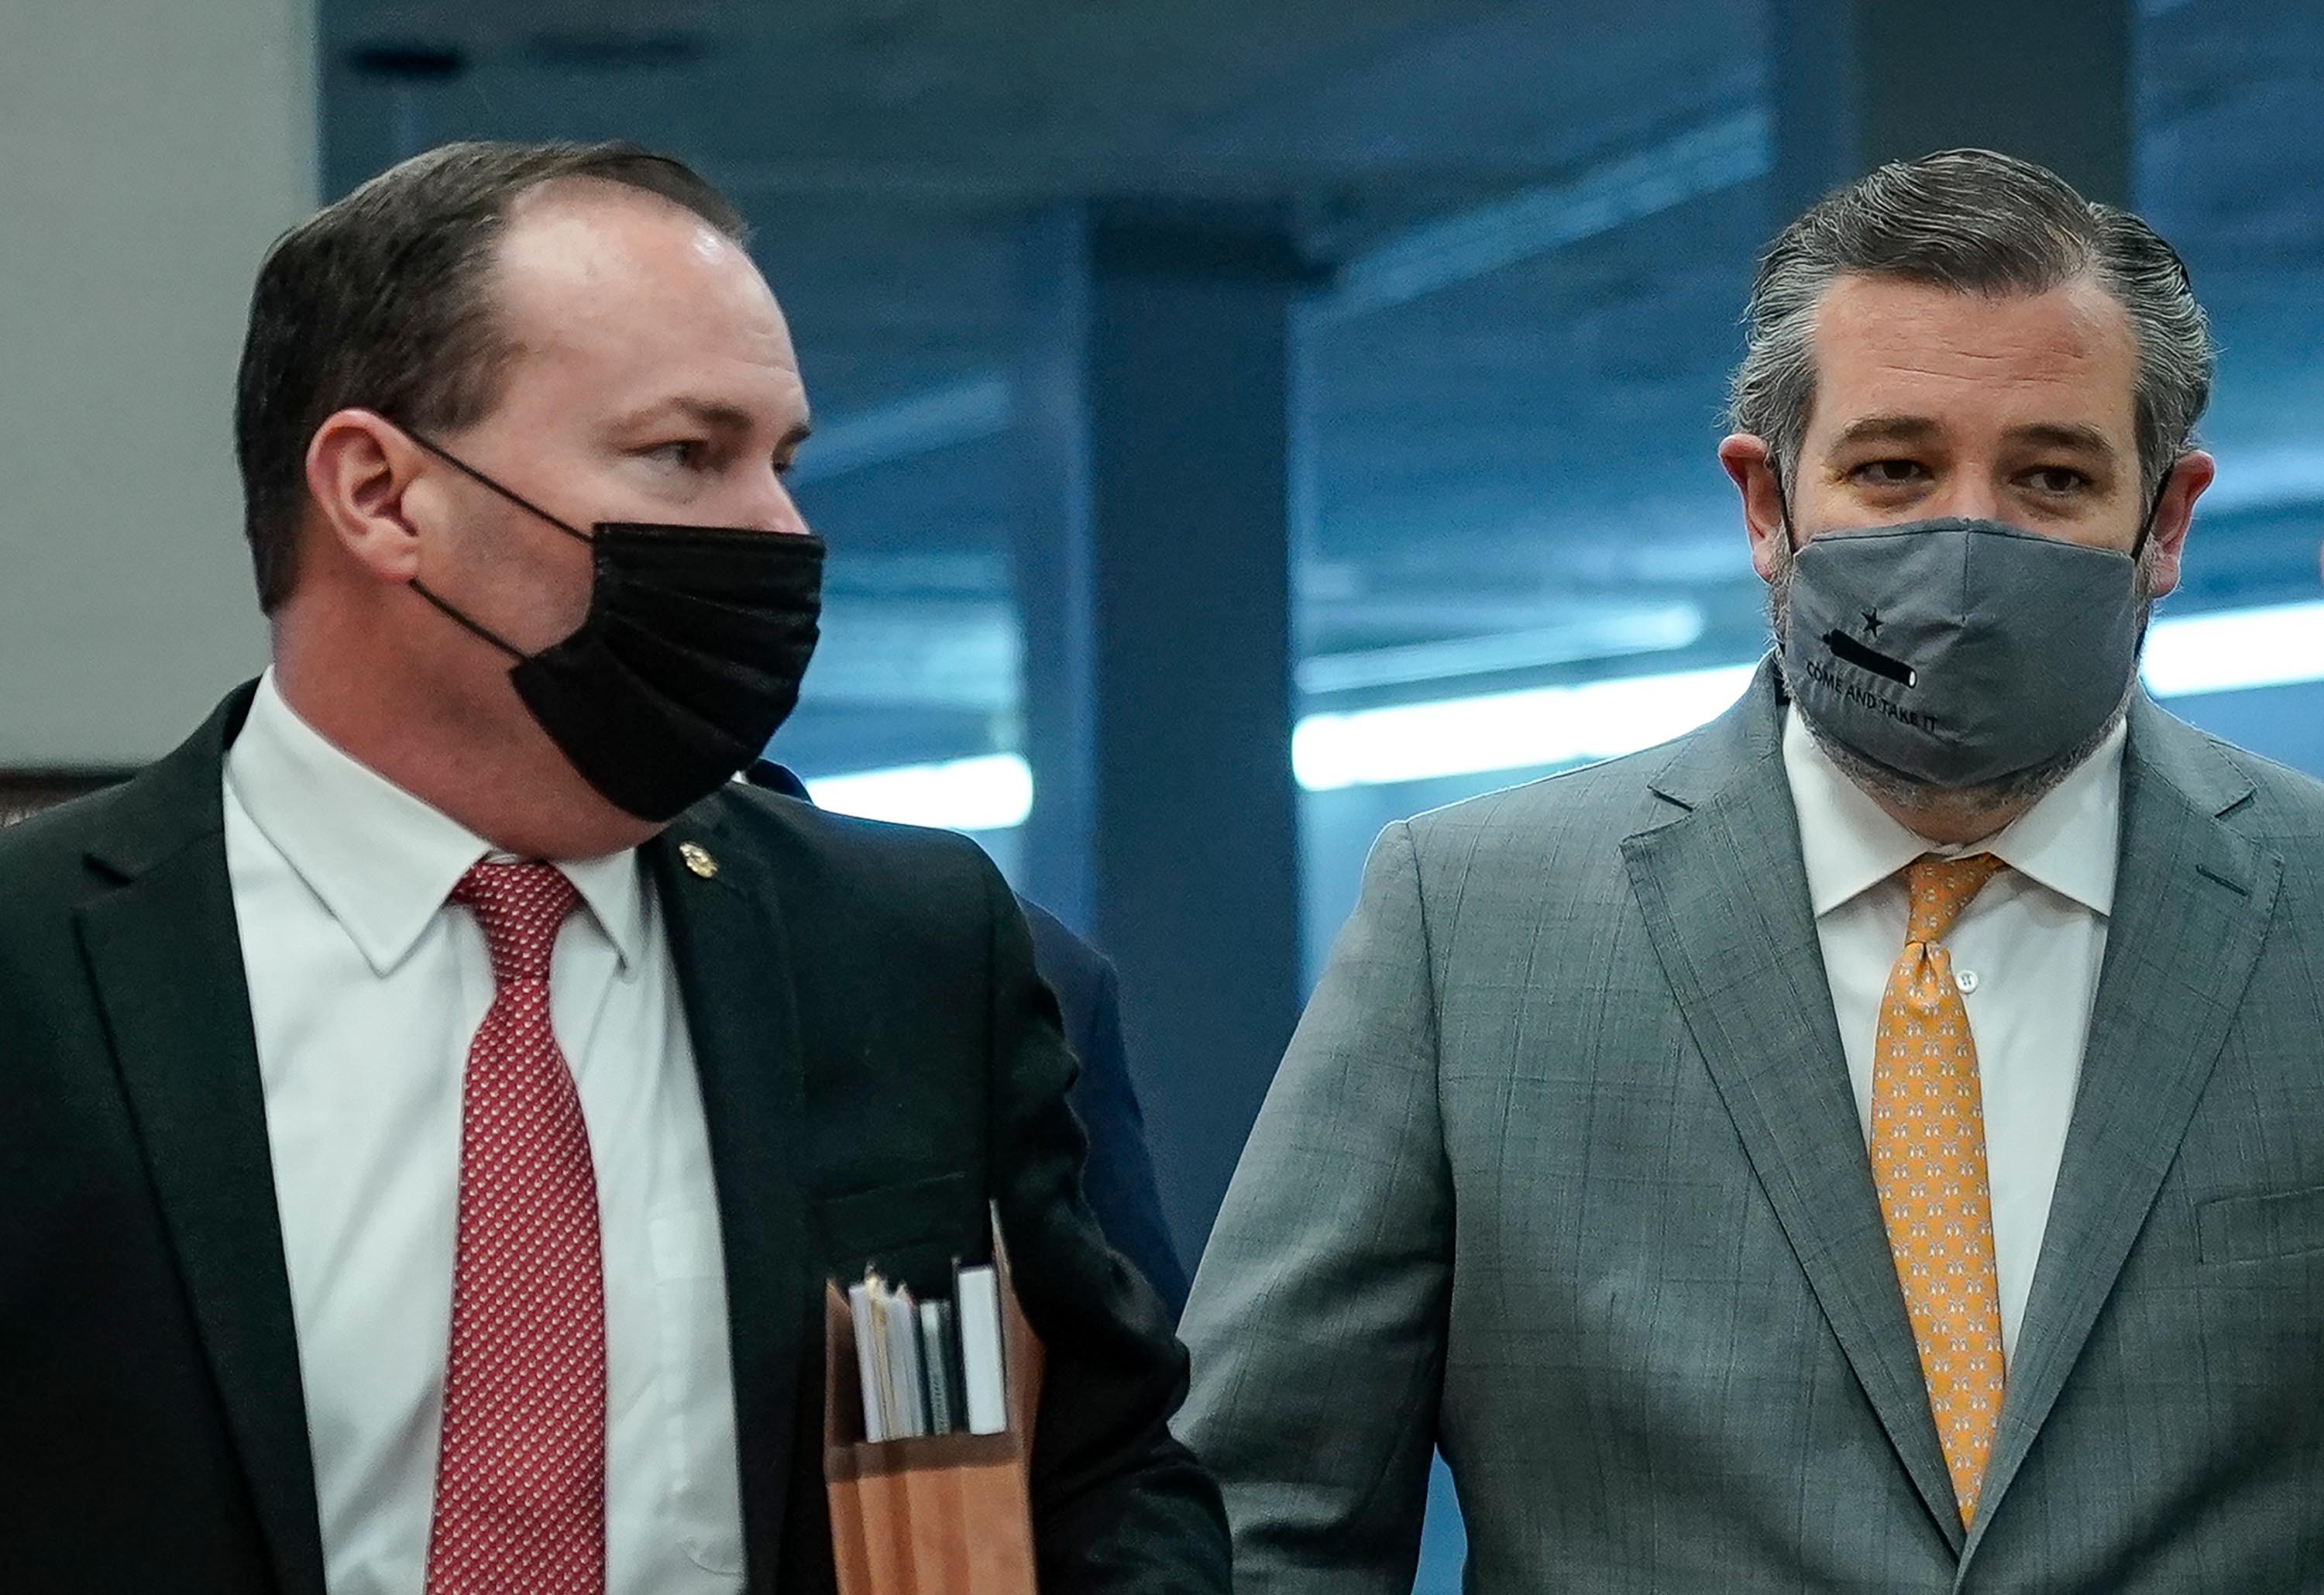 Sen. Mike Lee (R-UT) and Sen. Ted Cruz (R-TX) walk through the Senate subway on their way to the second day of former President Donald Trump's second impeachment trial at the U.S. Capitol on Wednesday, February 10.